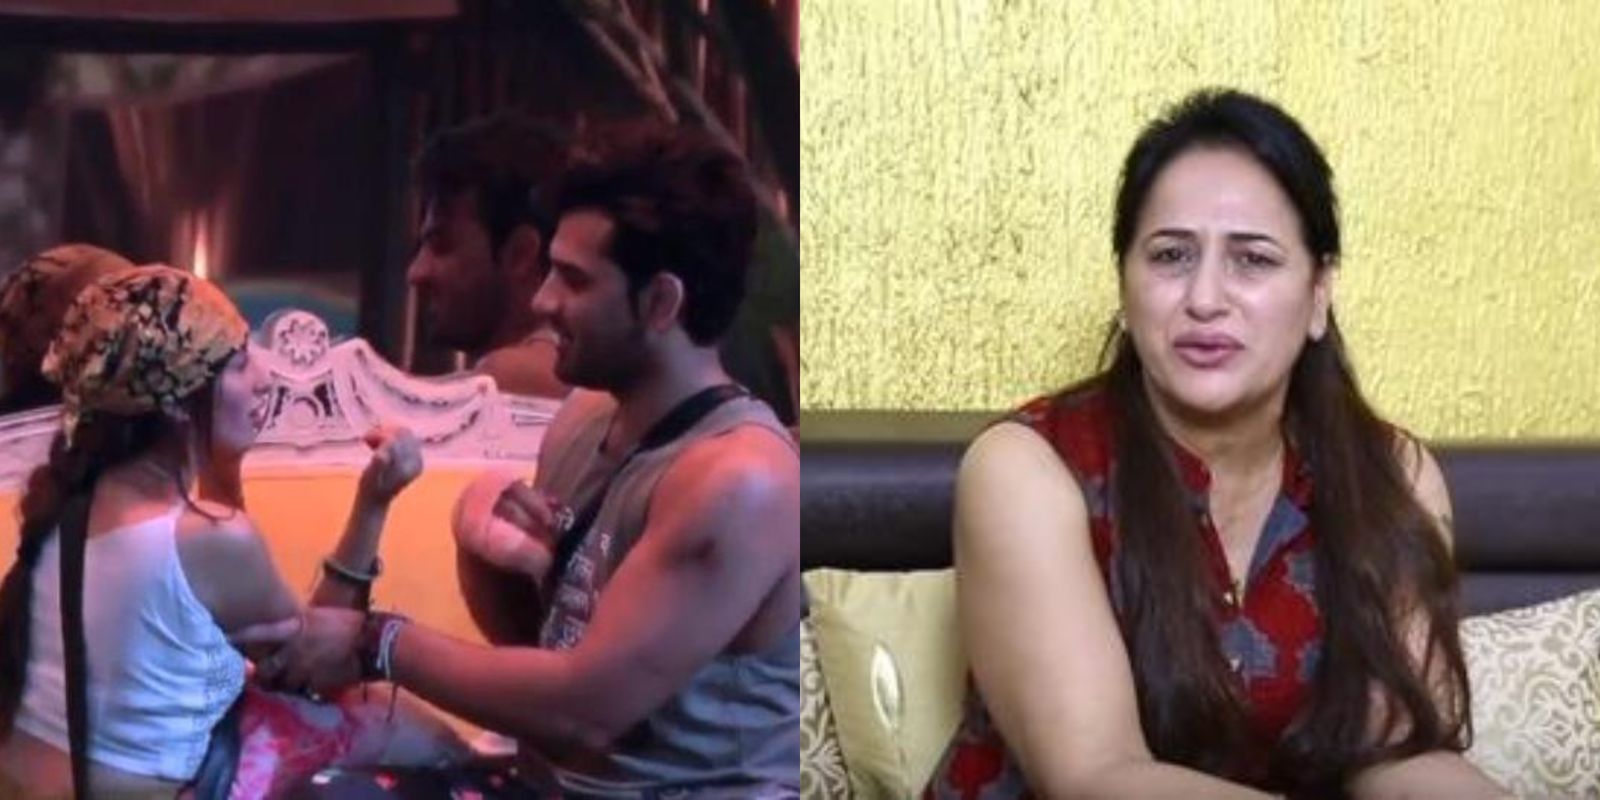 Bigg Boss 13: Mahira Sharma’s Mother Reveals Why She Asked Paras Chhabra To Stop Kissing Her Daughter